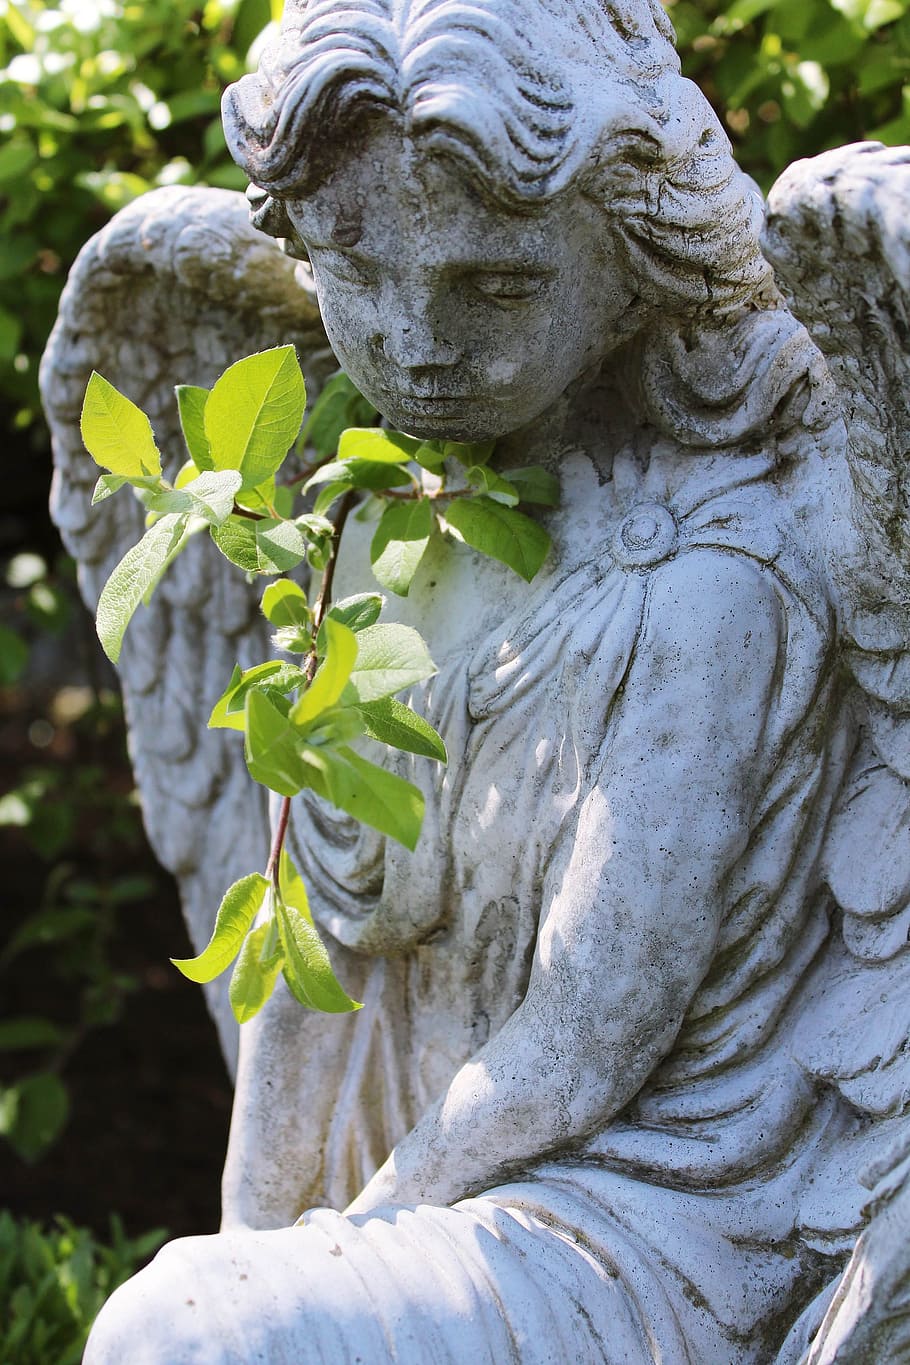 Angel, Statue, Nature, Cemetery, Grave, cemetery, grave, mourning, death, tombstone, peaceful